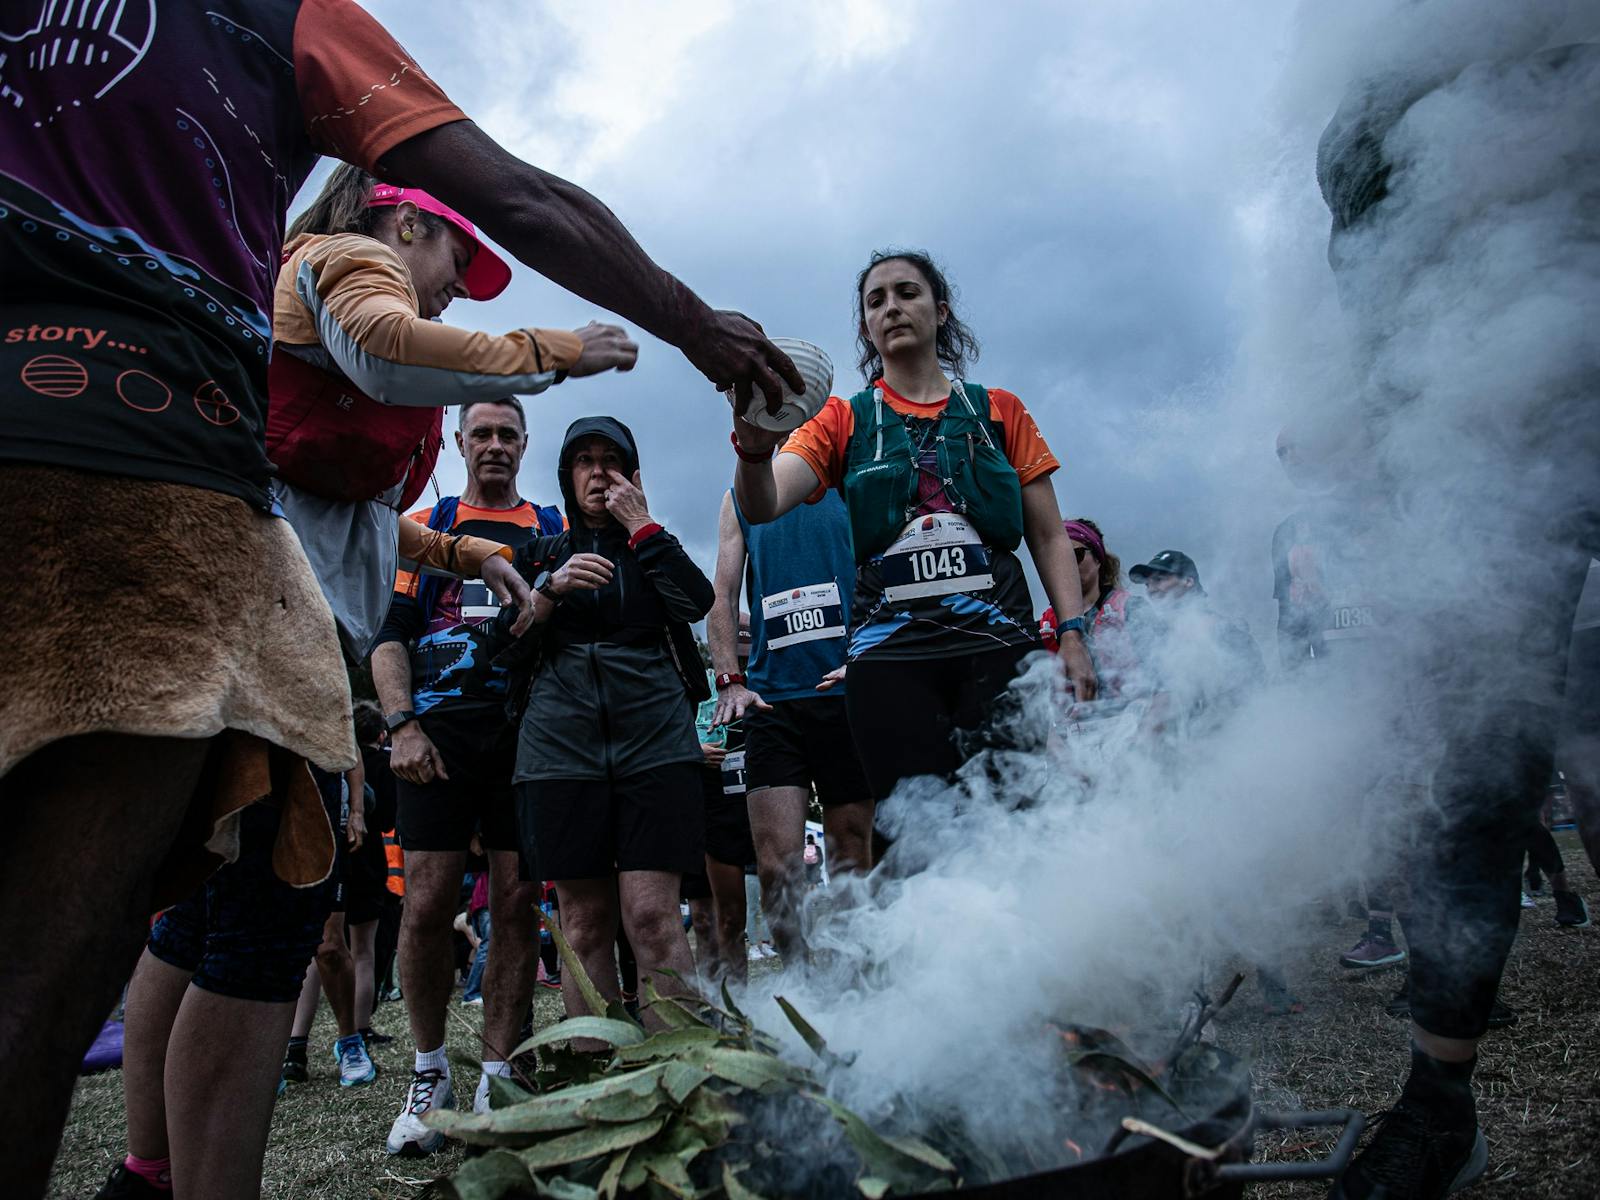 Runners participate in a smoking ceremony